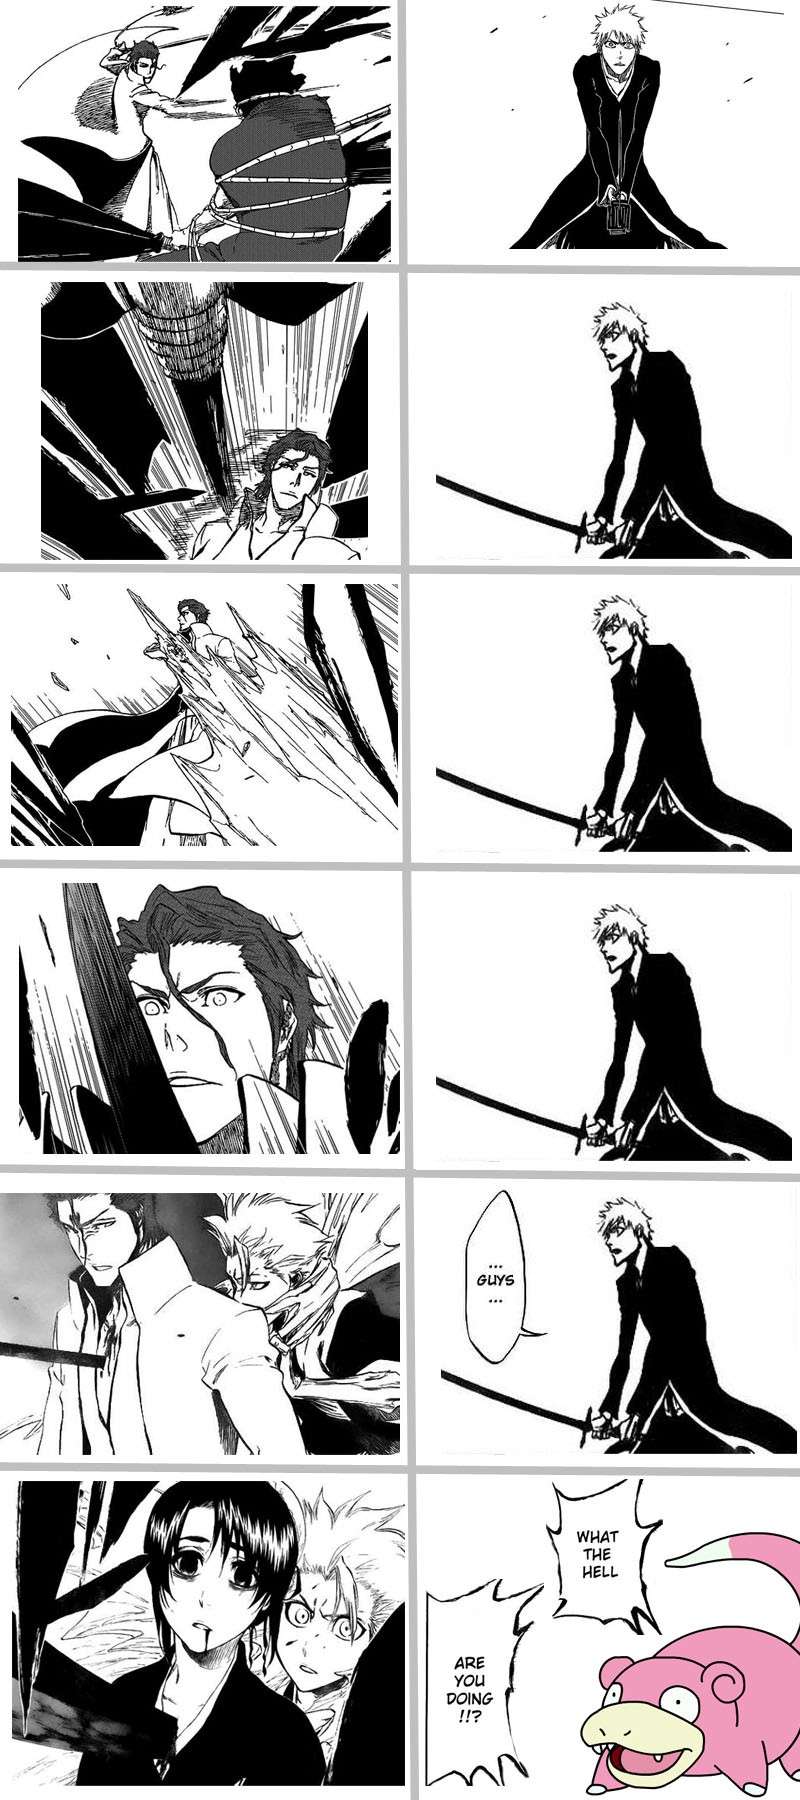 Bleach Chapter Dicussion-SPOILER WARNING!!! - Page 3 12658610